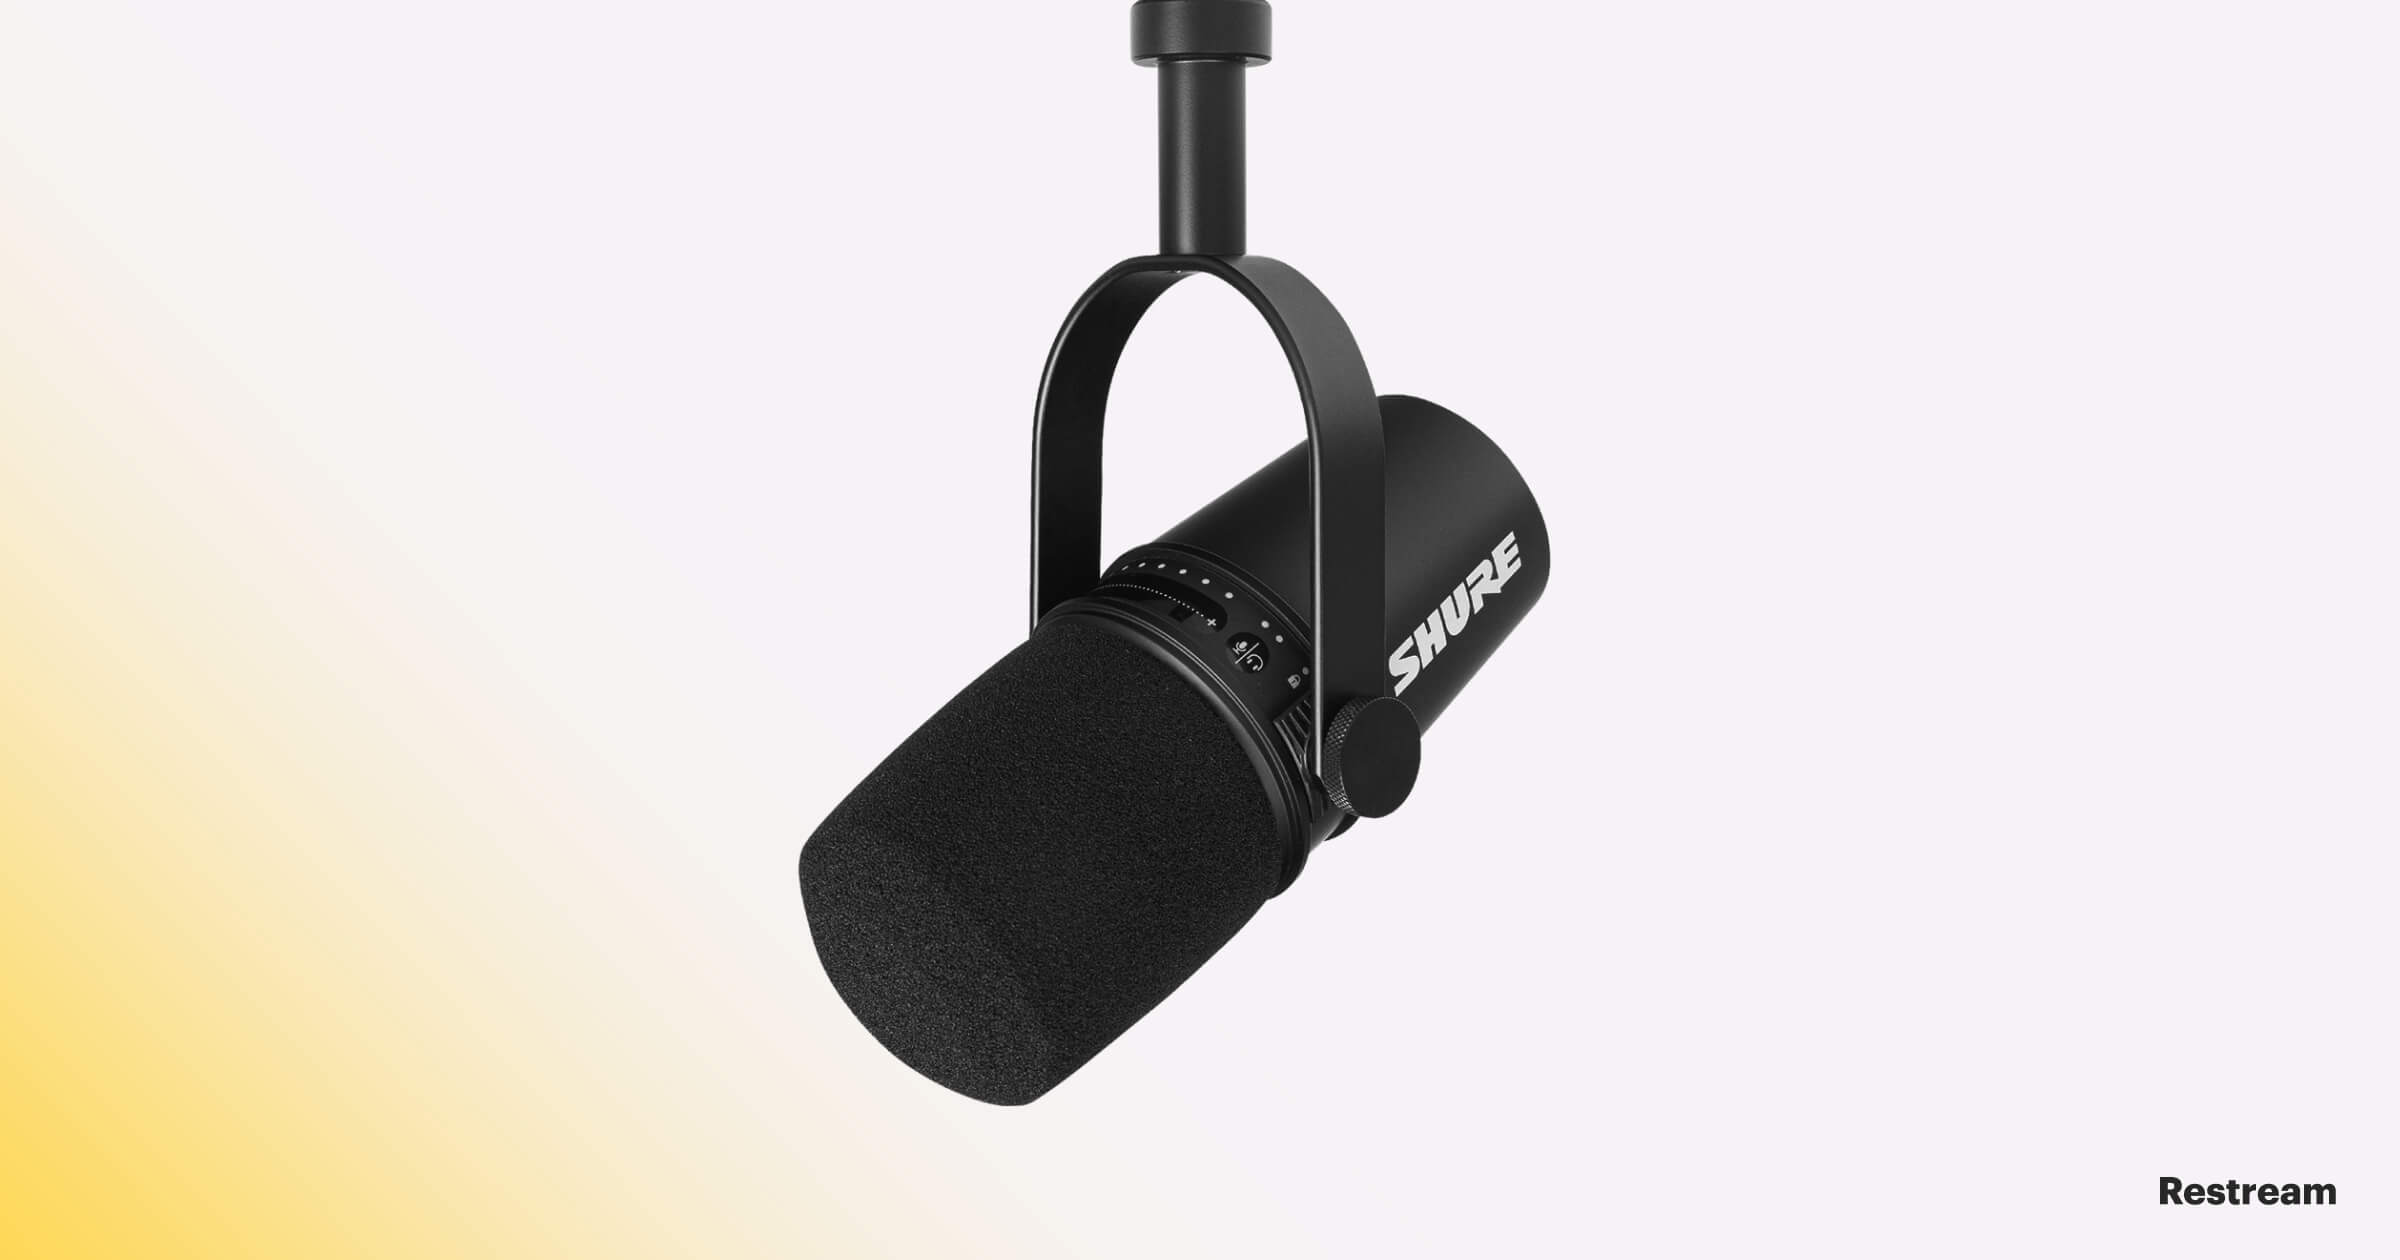 Microphone for streaming — Shure MV7